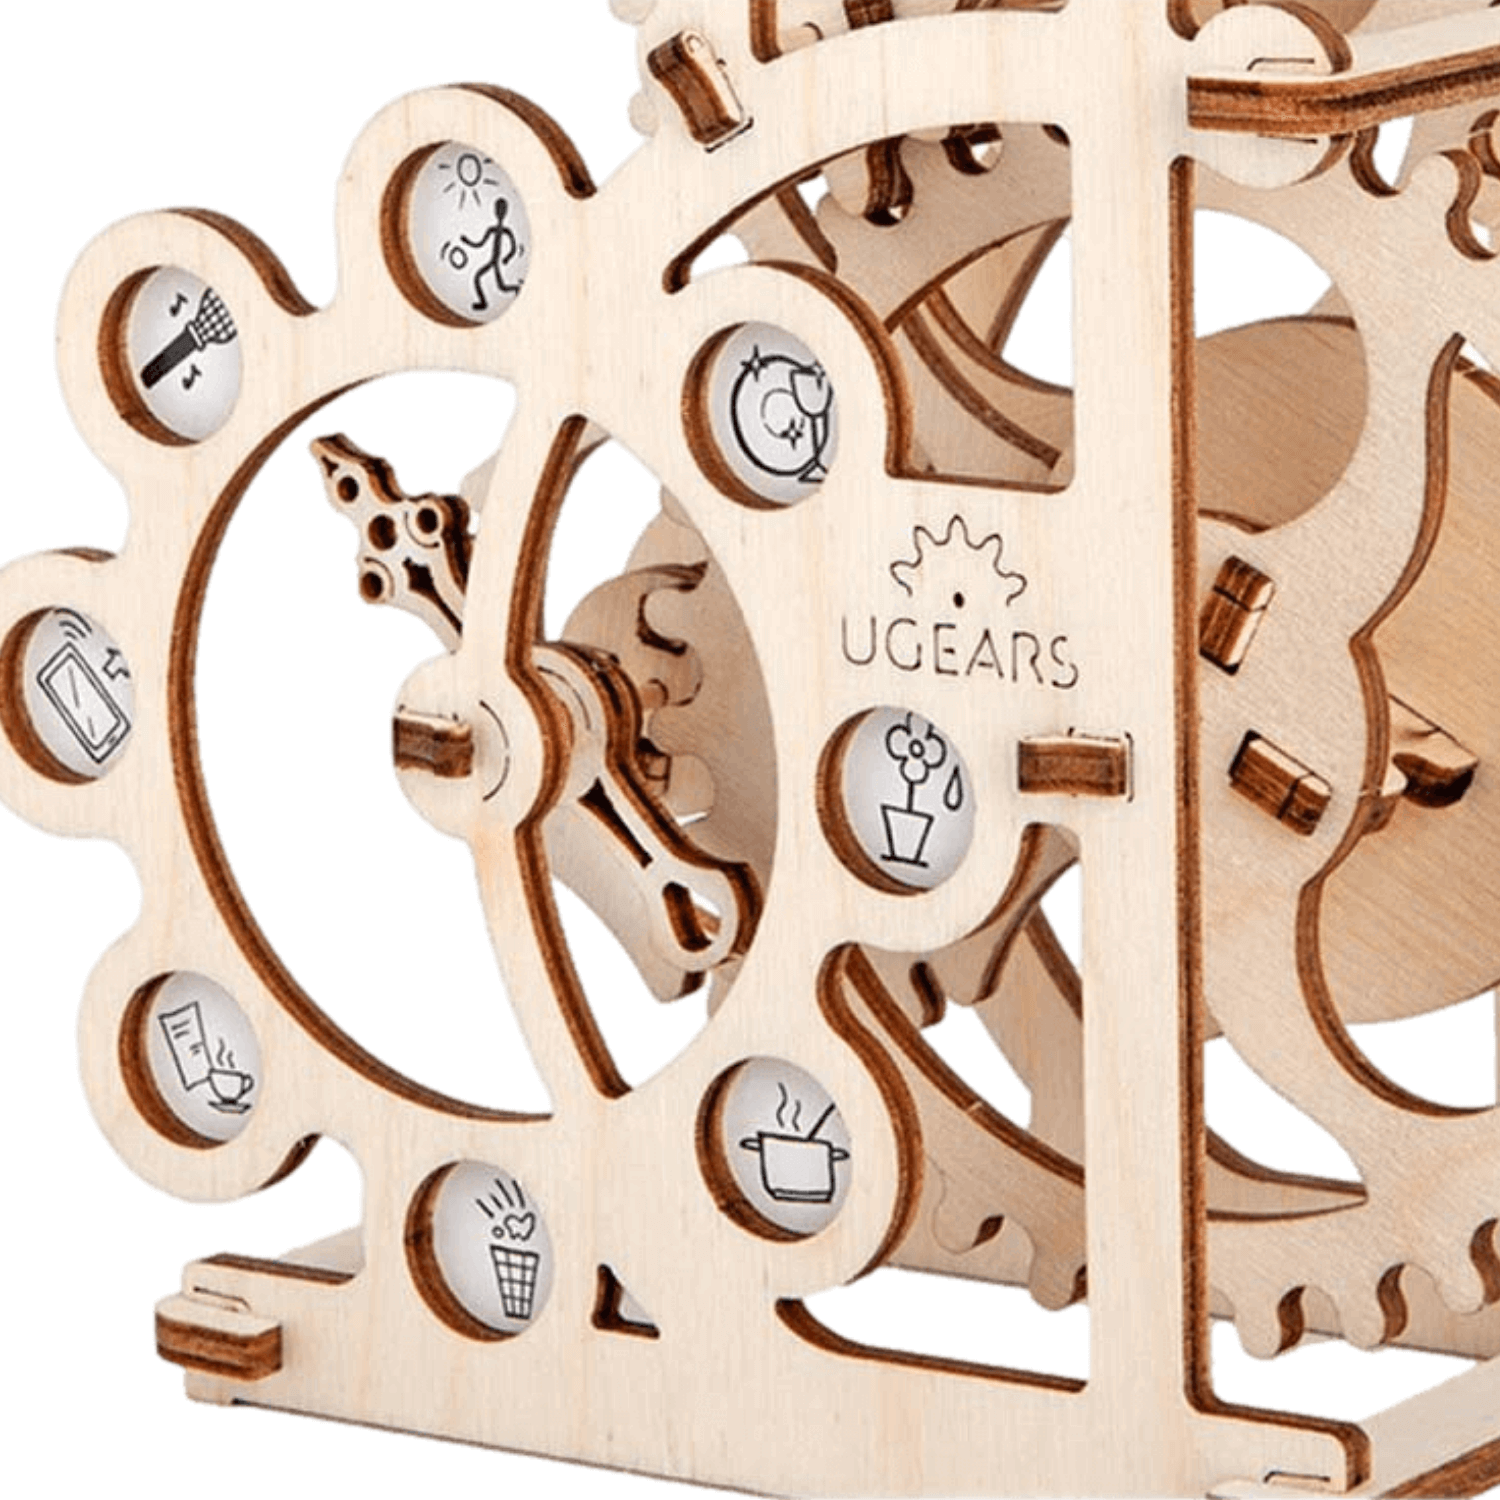 Dynamometer-Mechanisches Holzpuzzle-Ugears--